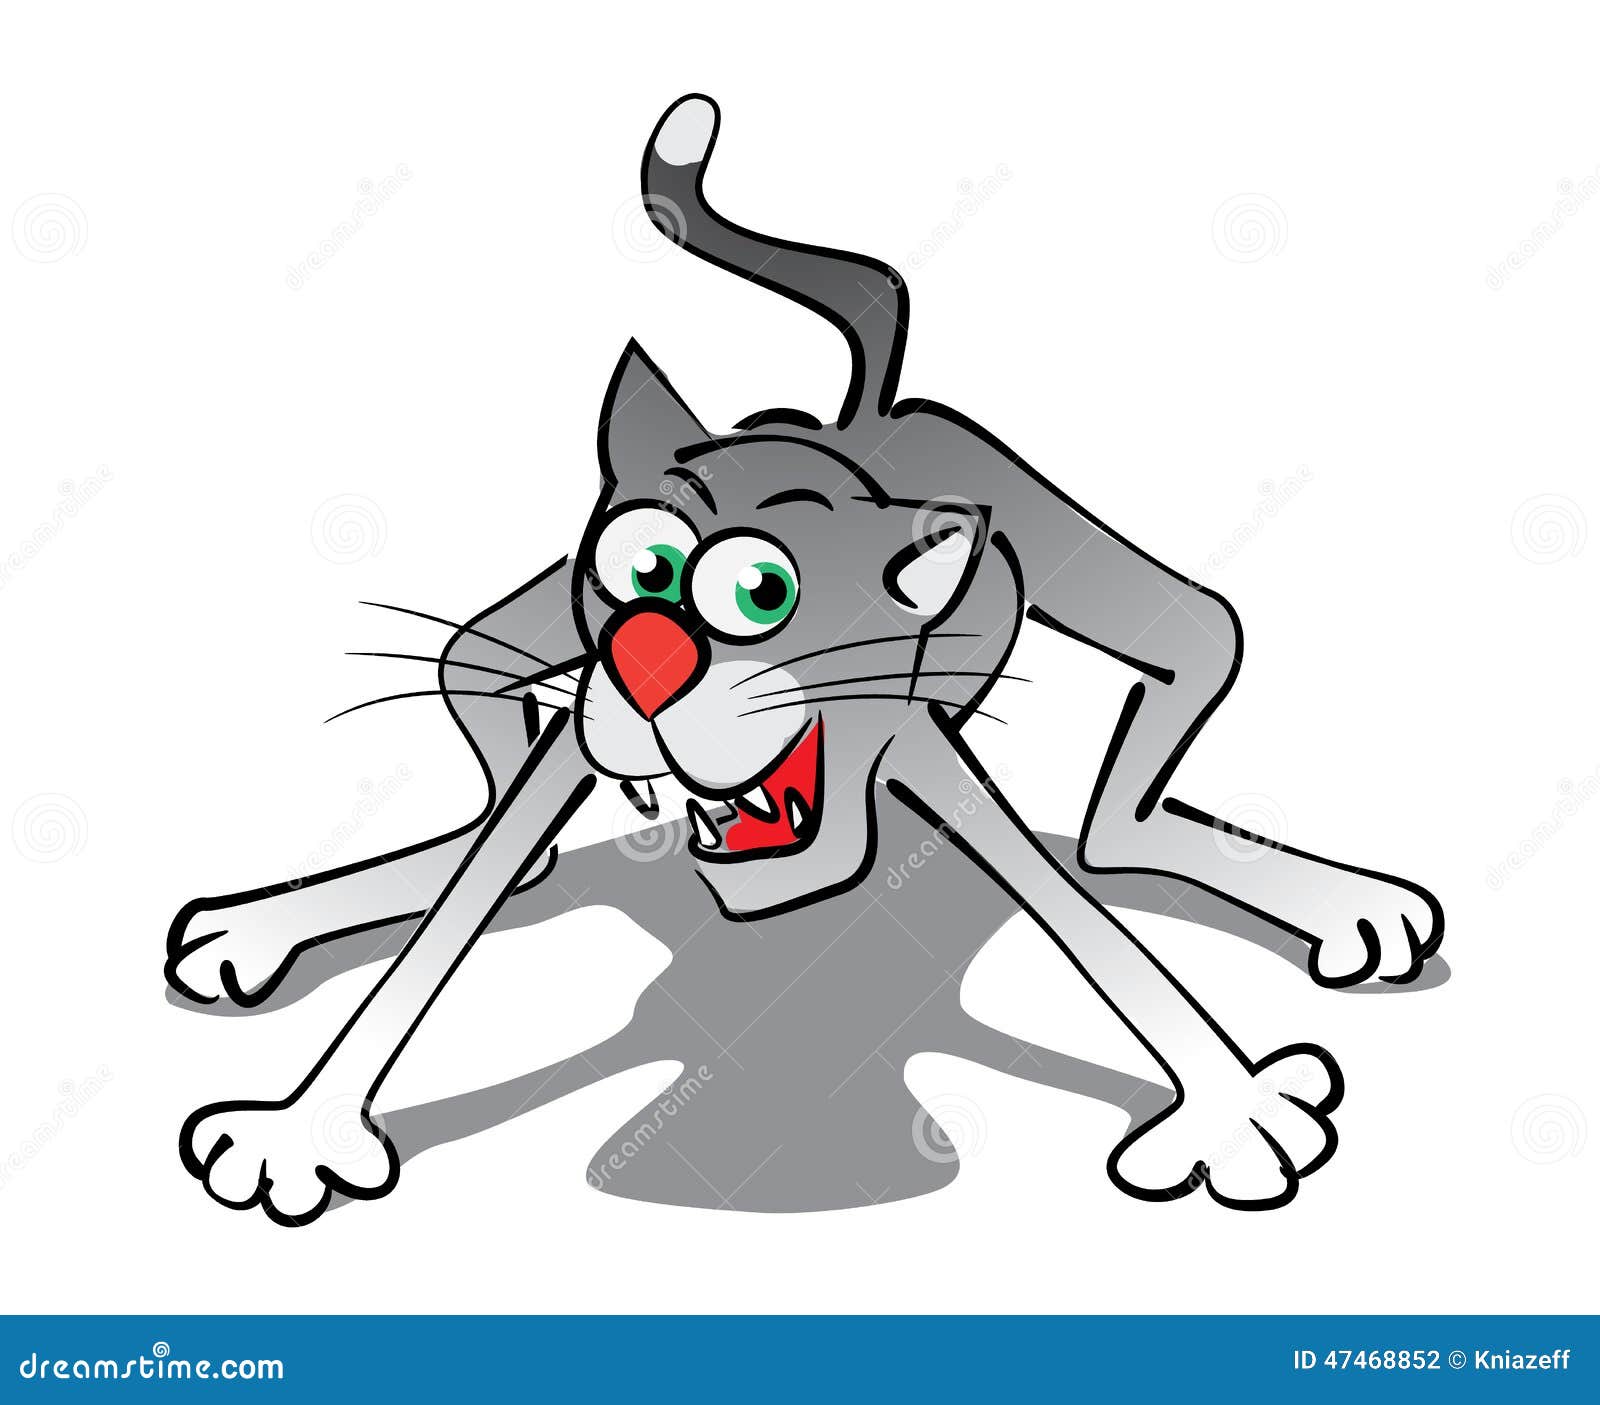 Angry cat 1 Royalty Free Vector Image - VectorStock